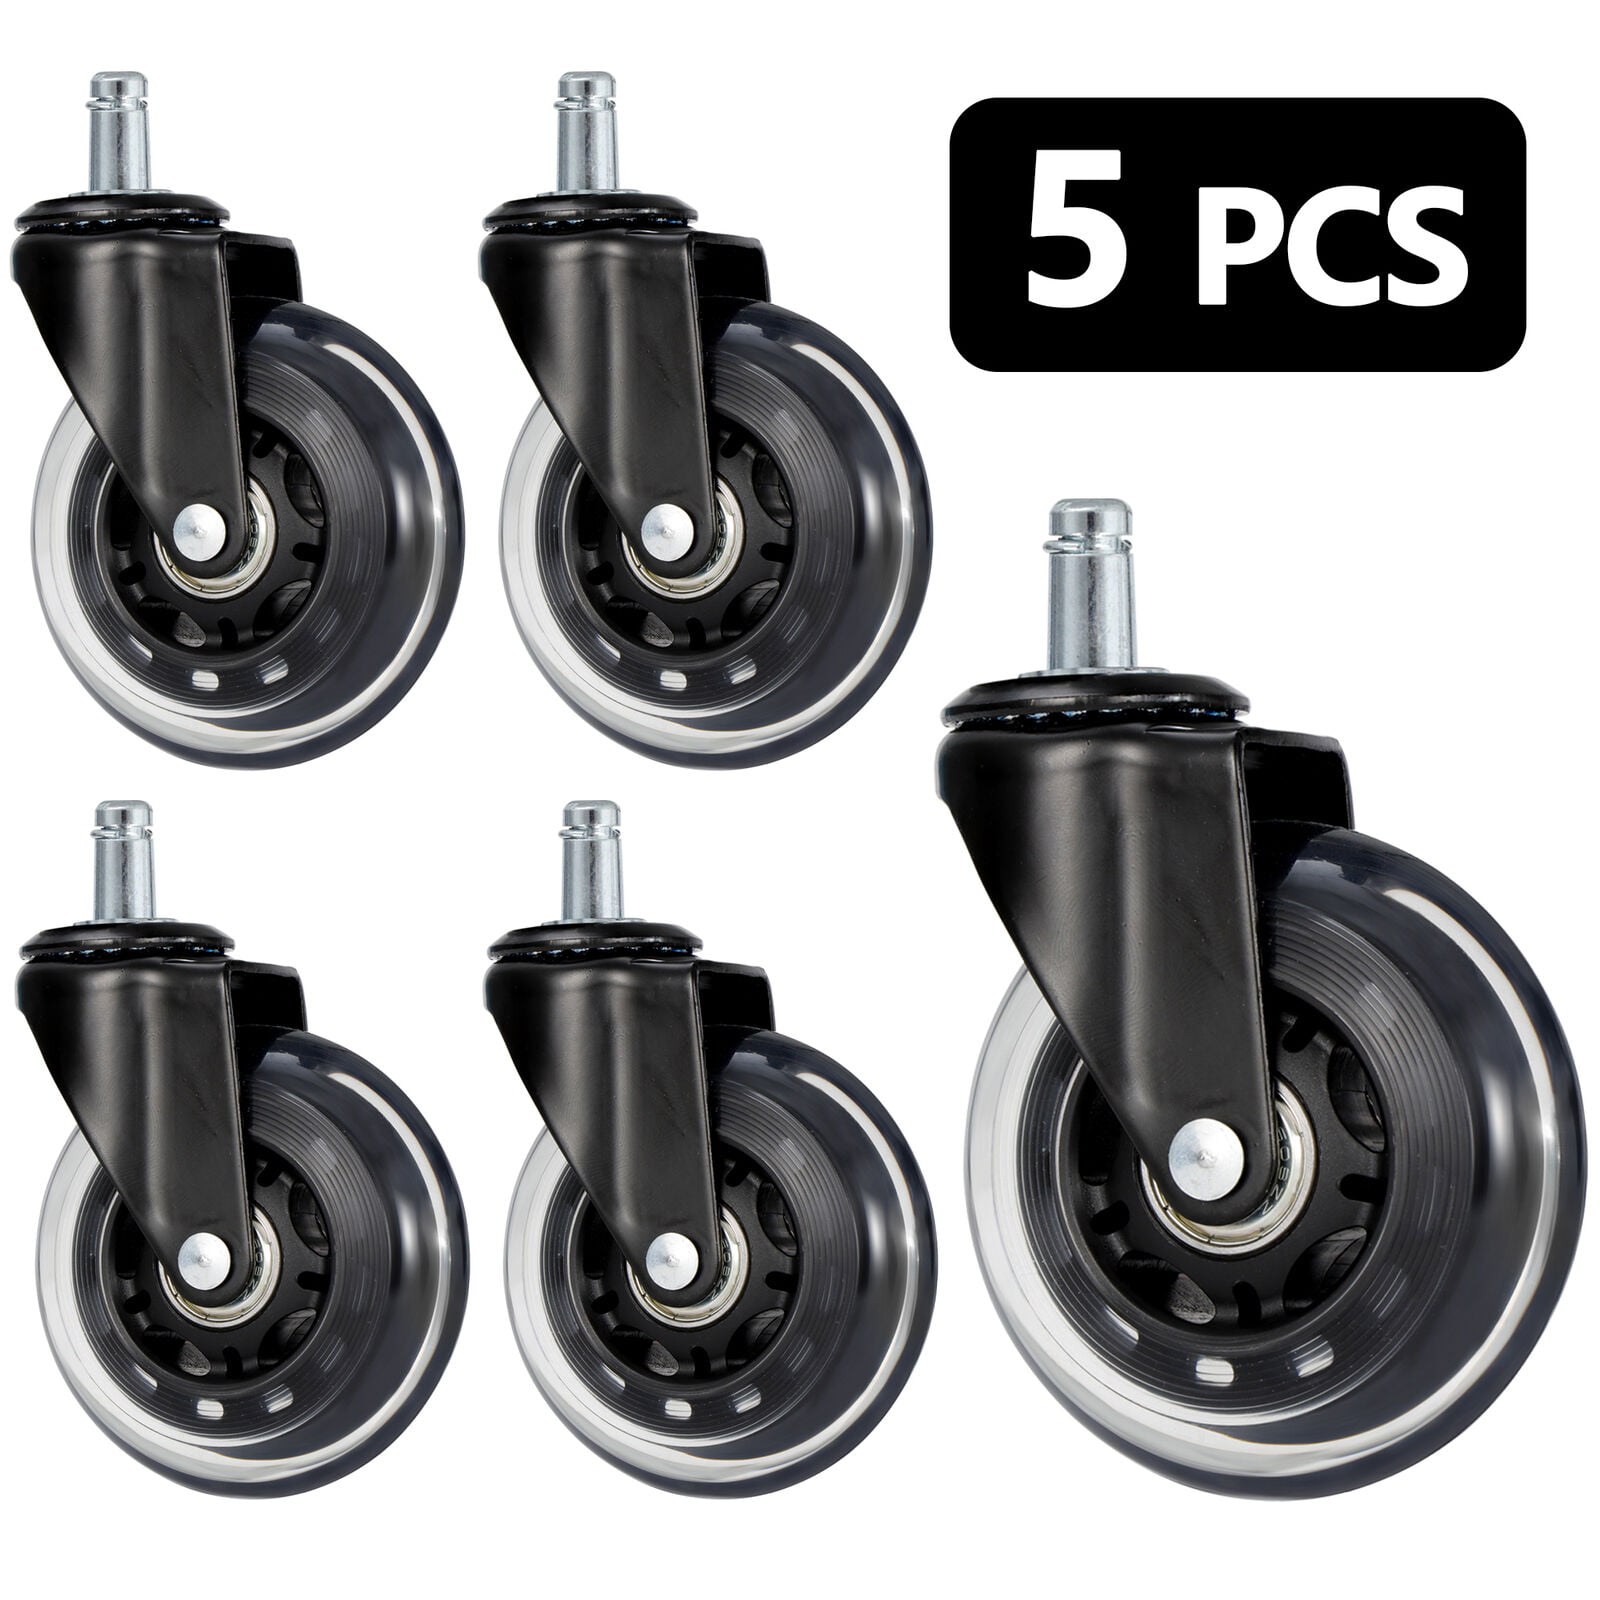 5PCS Heavy Duty 3" Office Chair Caster Rubber Swivel Caster Wheels Replacement 